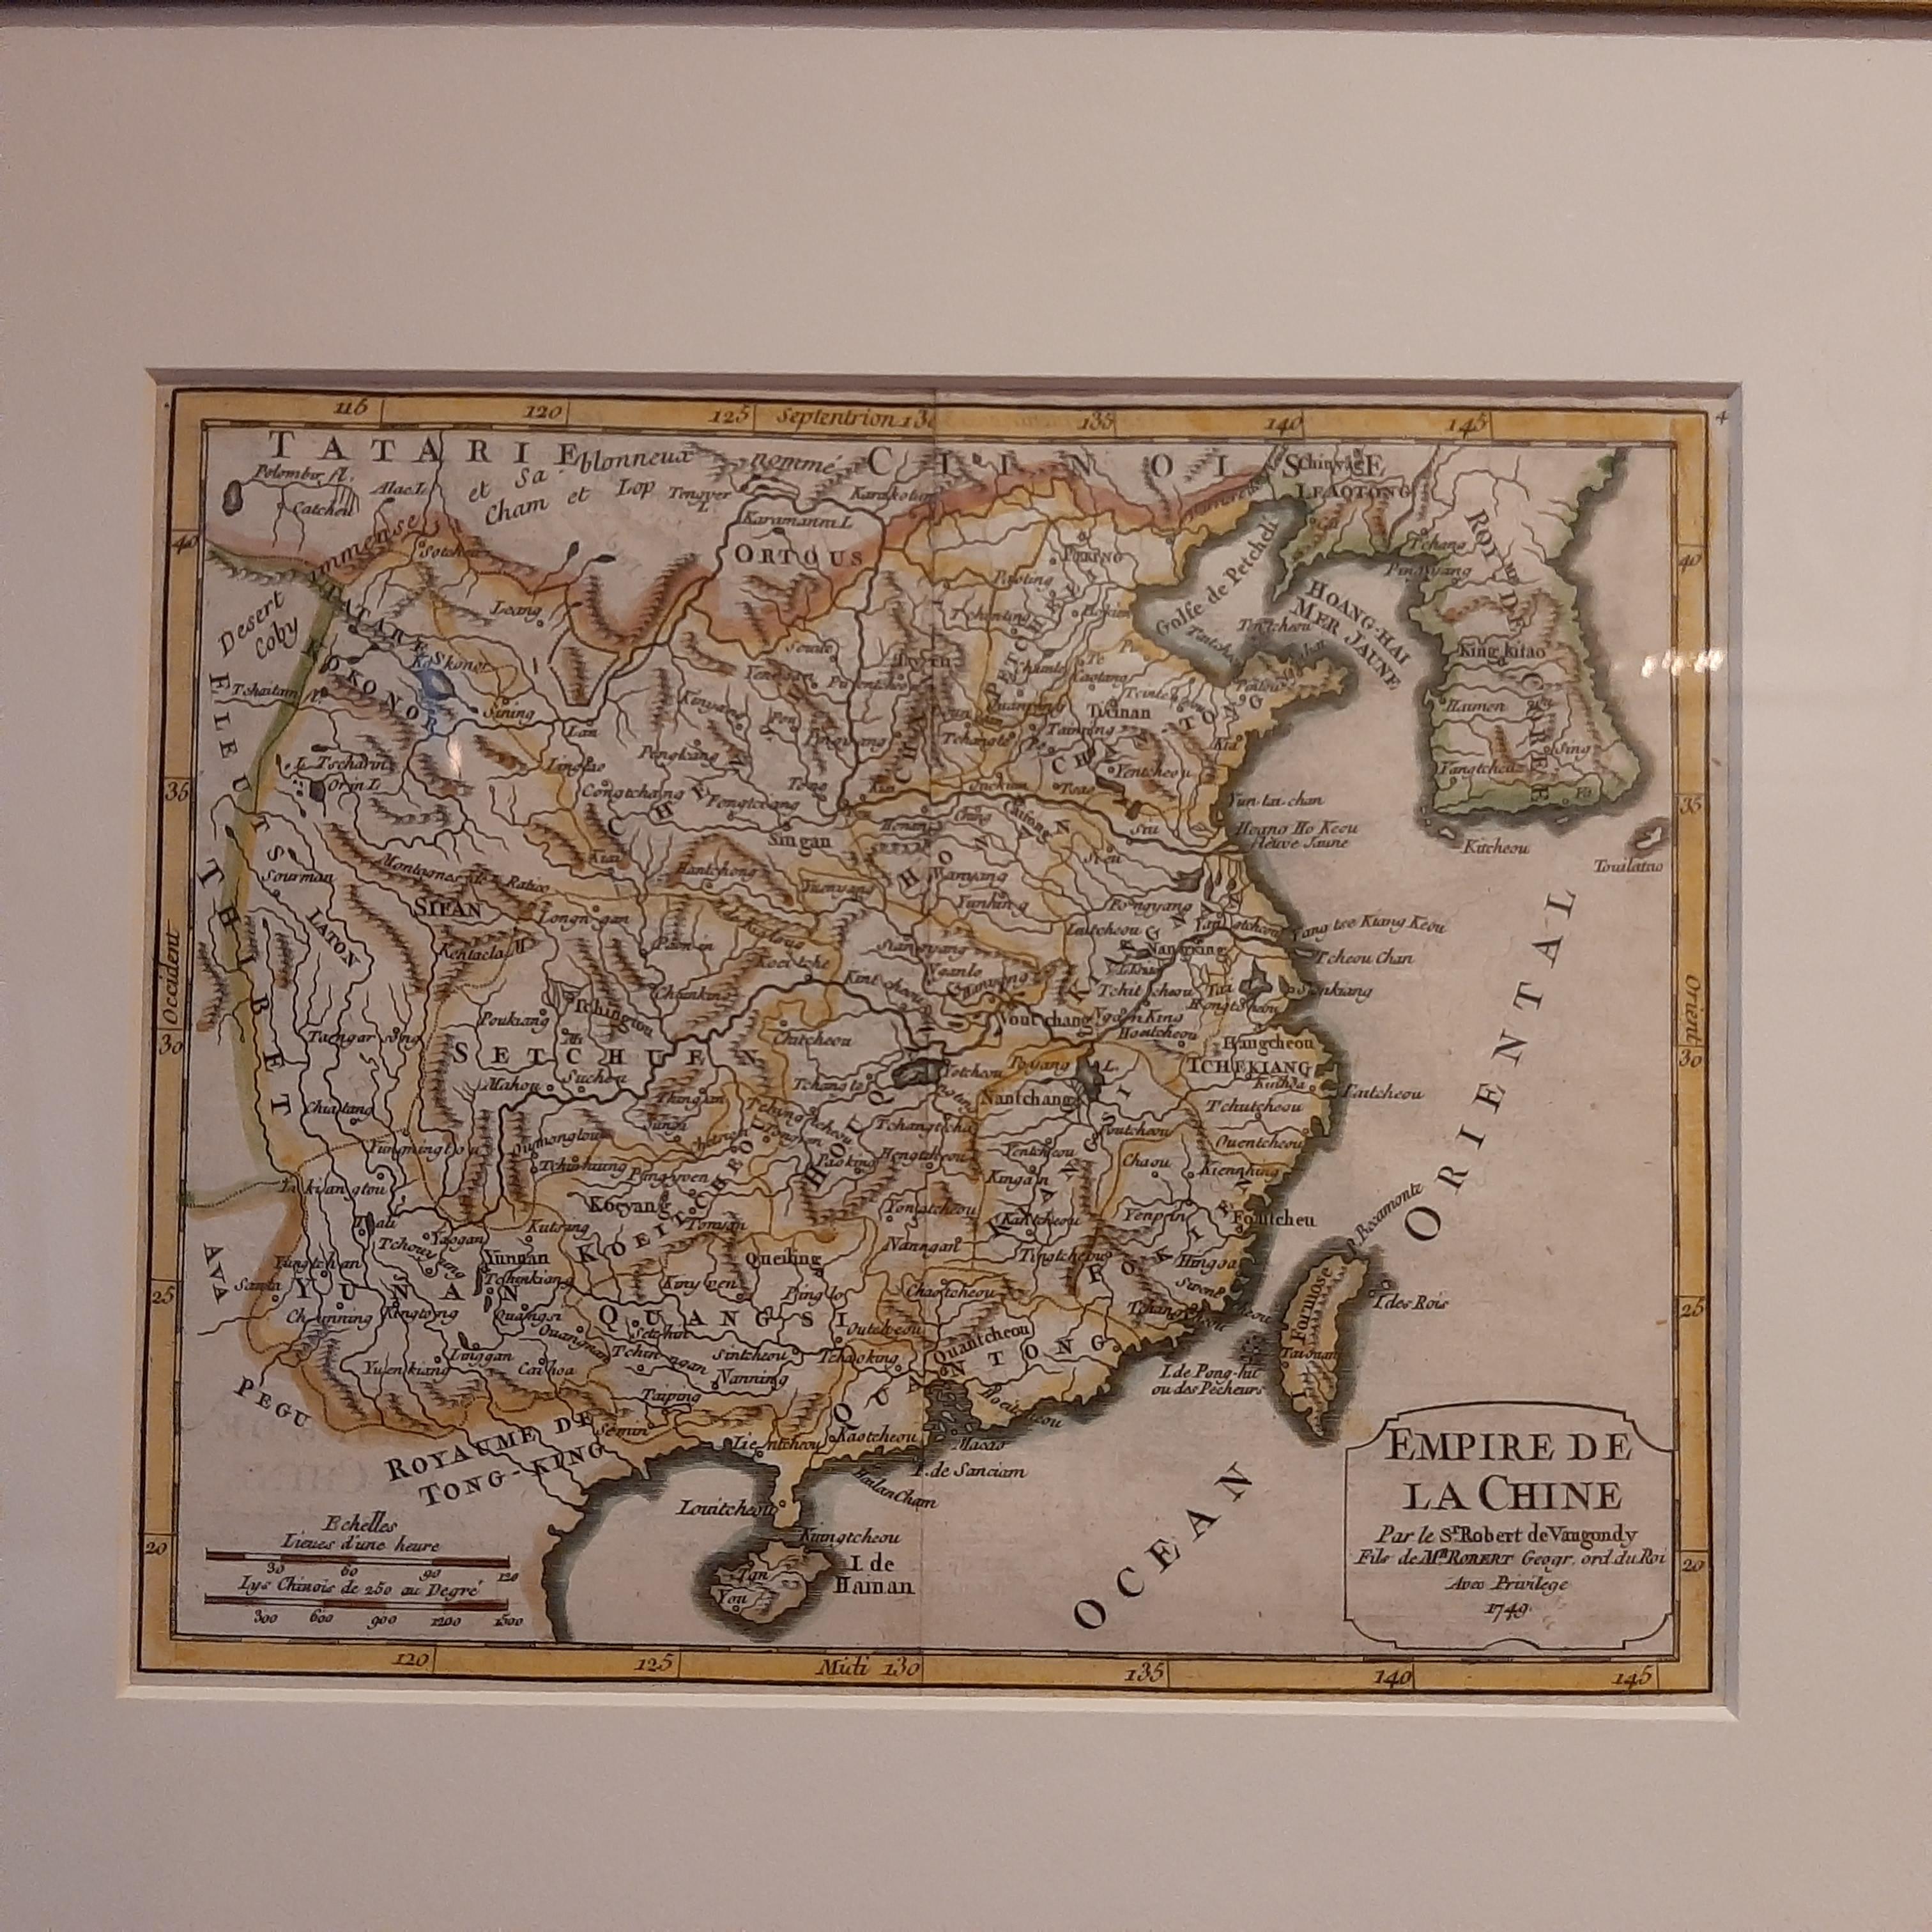 Antique map titled 'Empire de la Chine'. Beautiful map of China including Korea and Taiwan (Formosa). This map originates from 'Atlas Universel (..)' by Gilles Robert de Vaugondy, 1749. 

Frame included. We carefully pack our framed items to